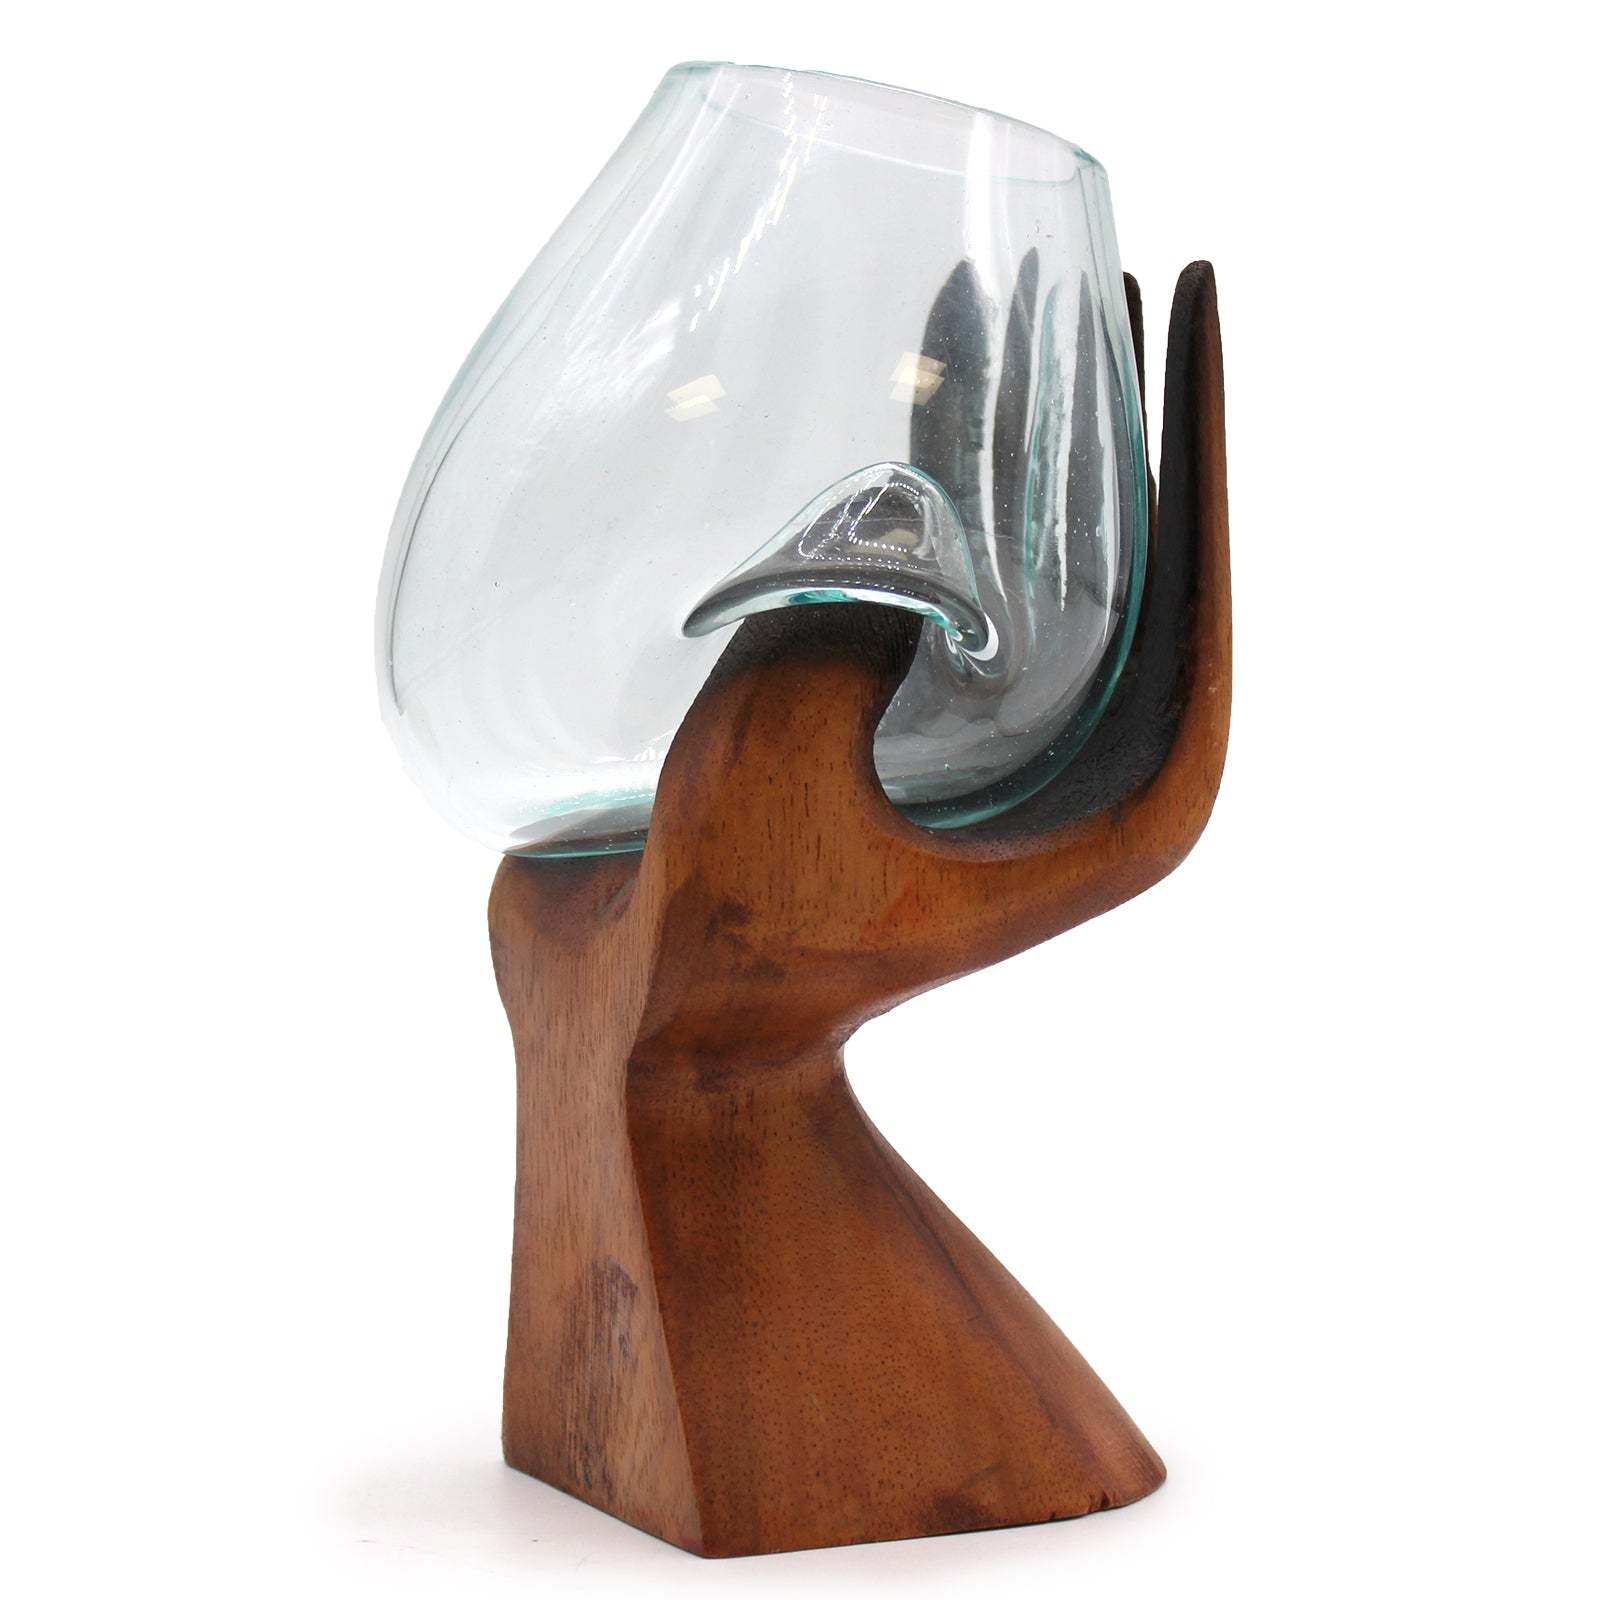 Molton Glass Bowl On Wooden Hand - $63.99